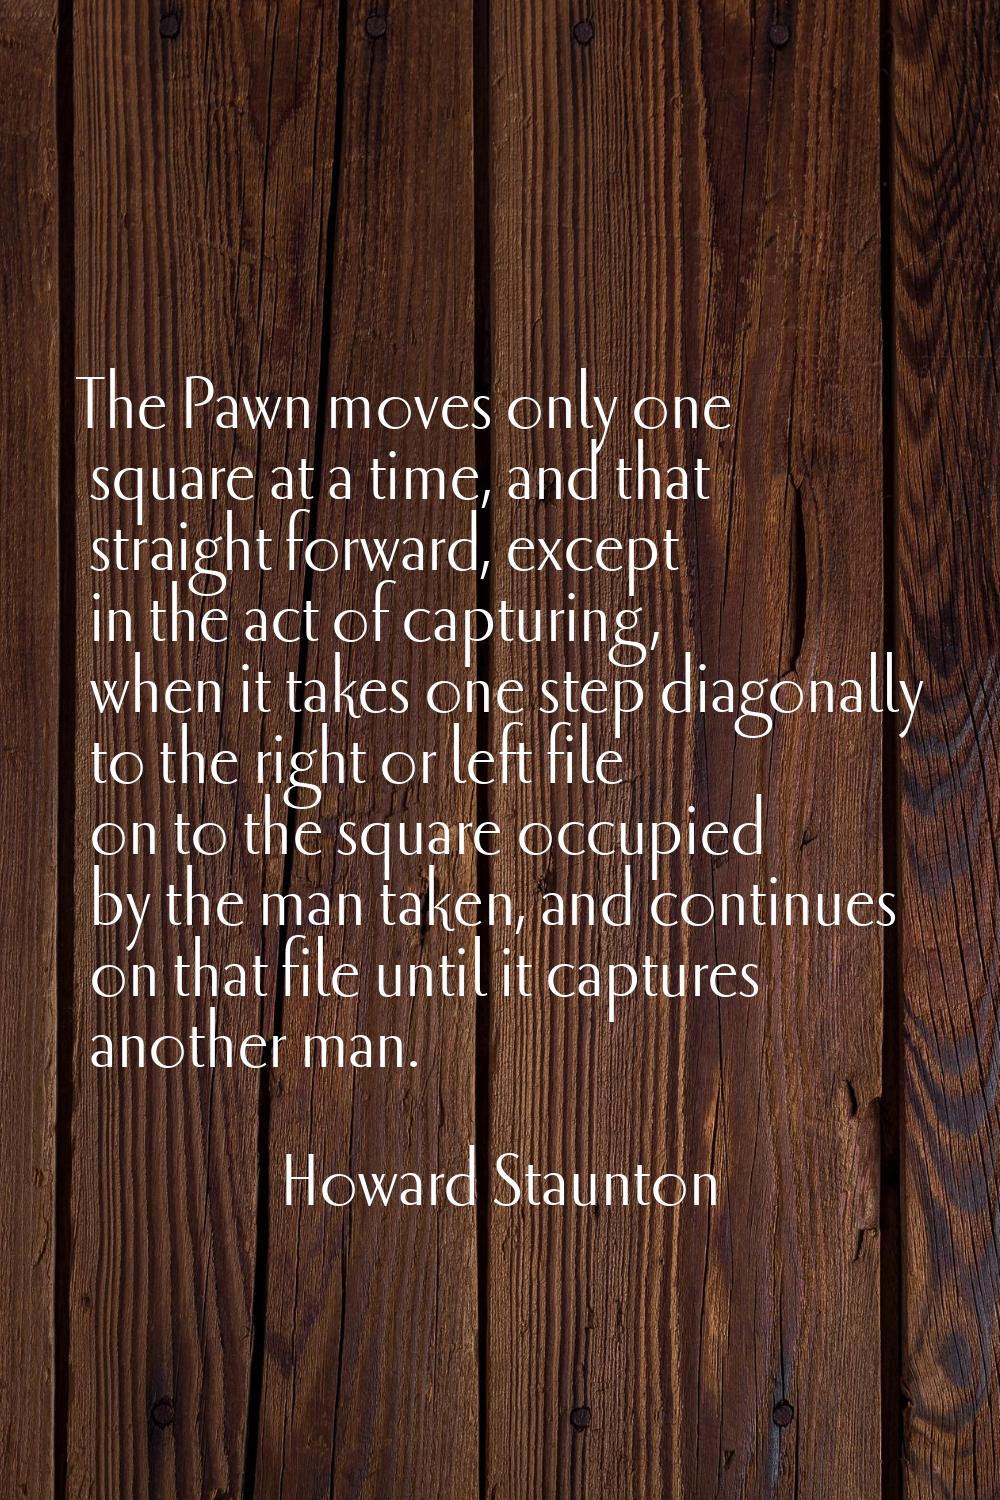 The Pawn moves only one square at a time, and that straight forward, except in the act of capturing